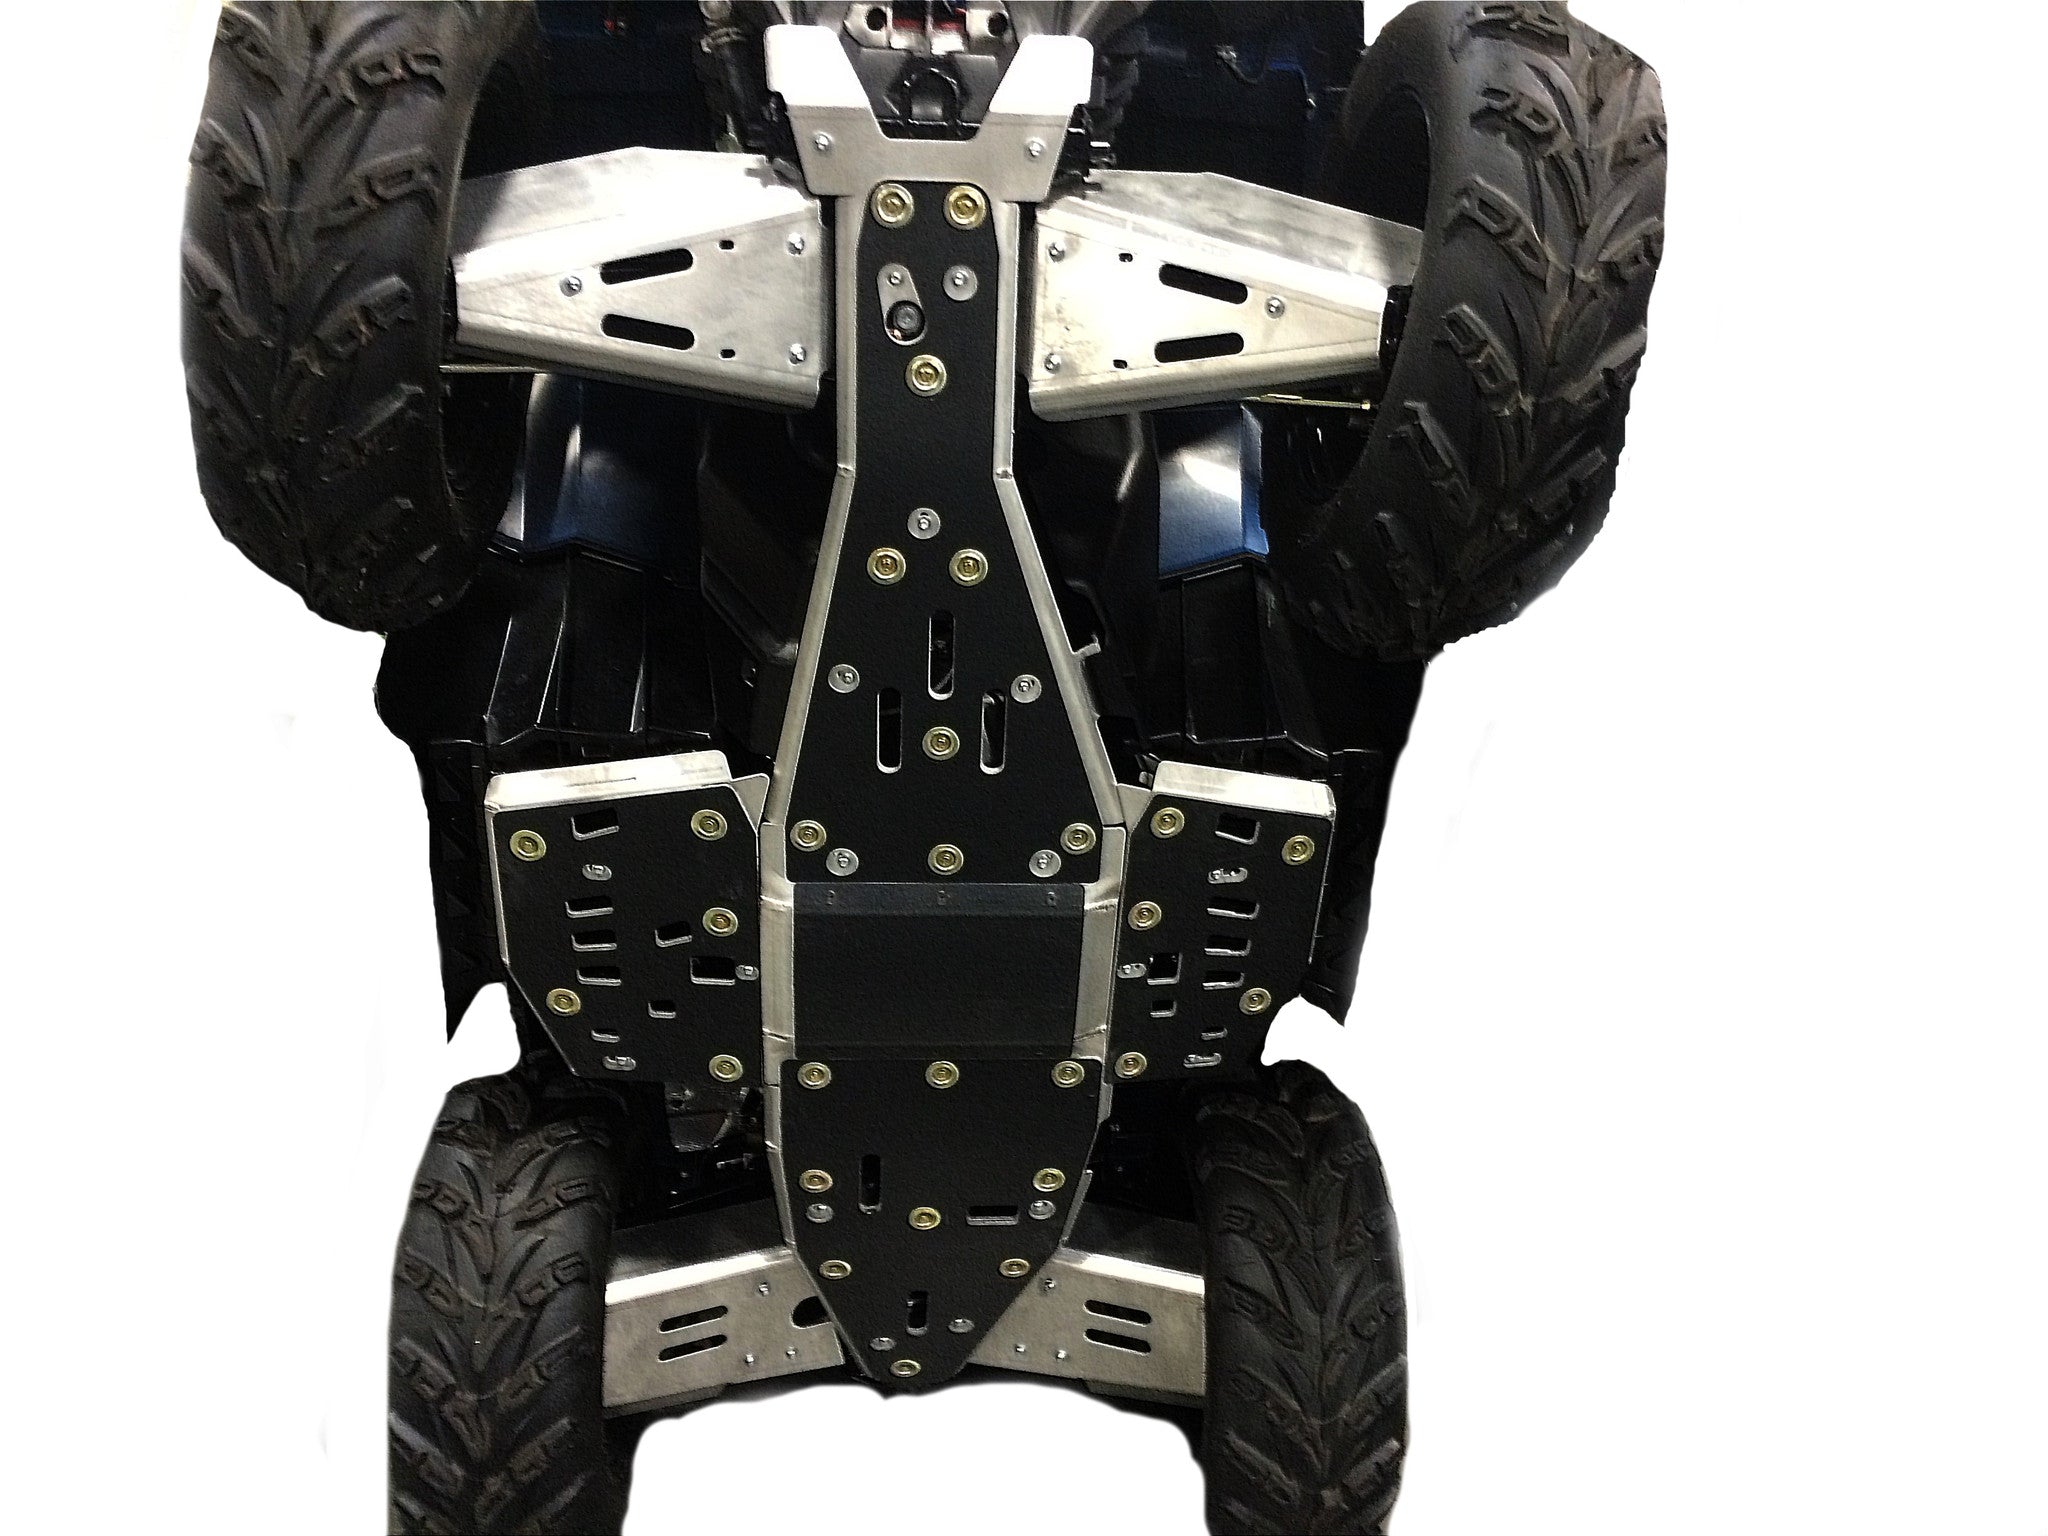 8-Piece Complete Aluminum, or with UHMW Layer Skid Plate Set, Polaris Sportsman 1000 Touring